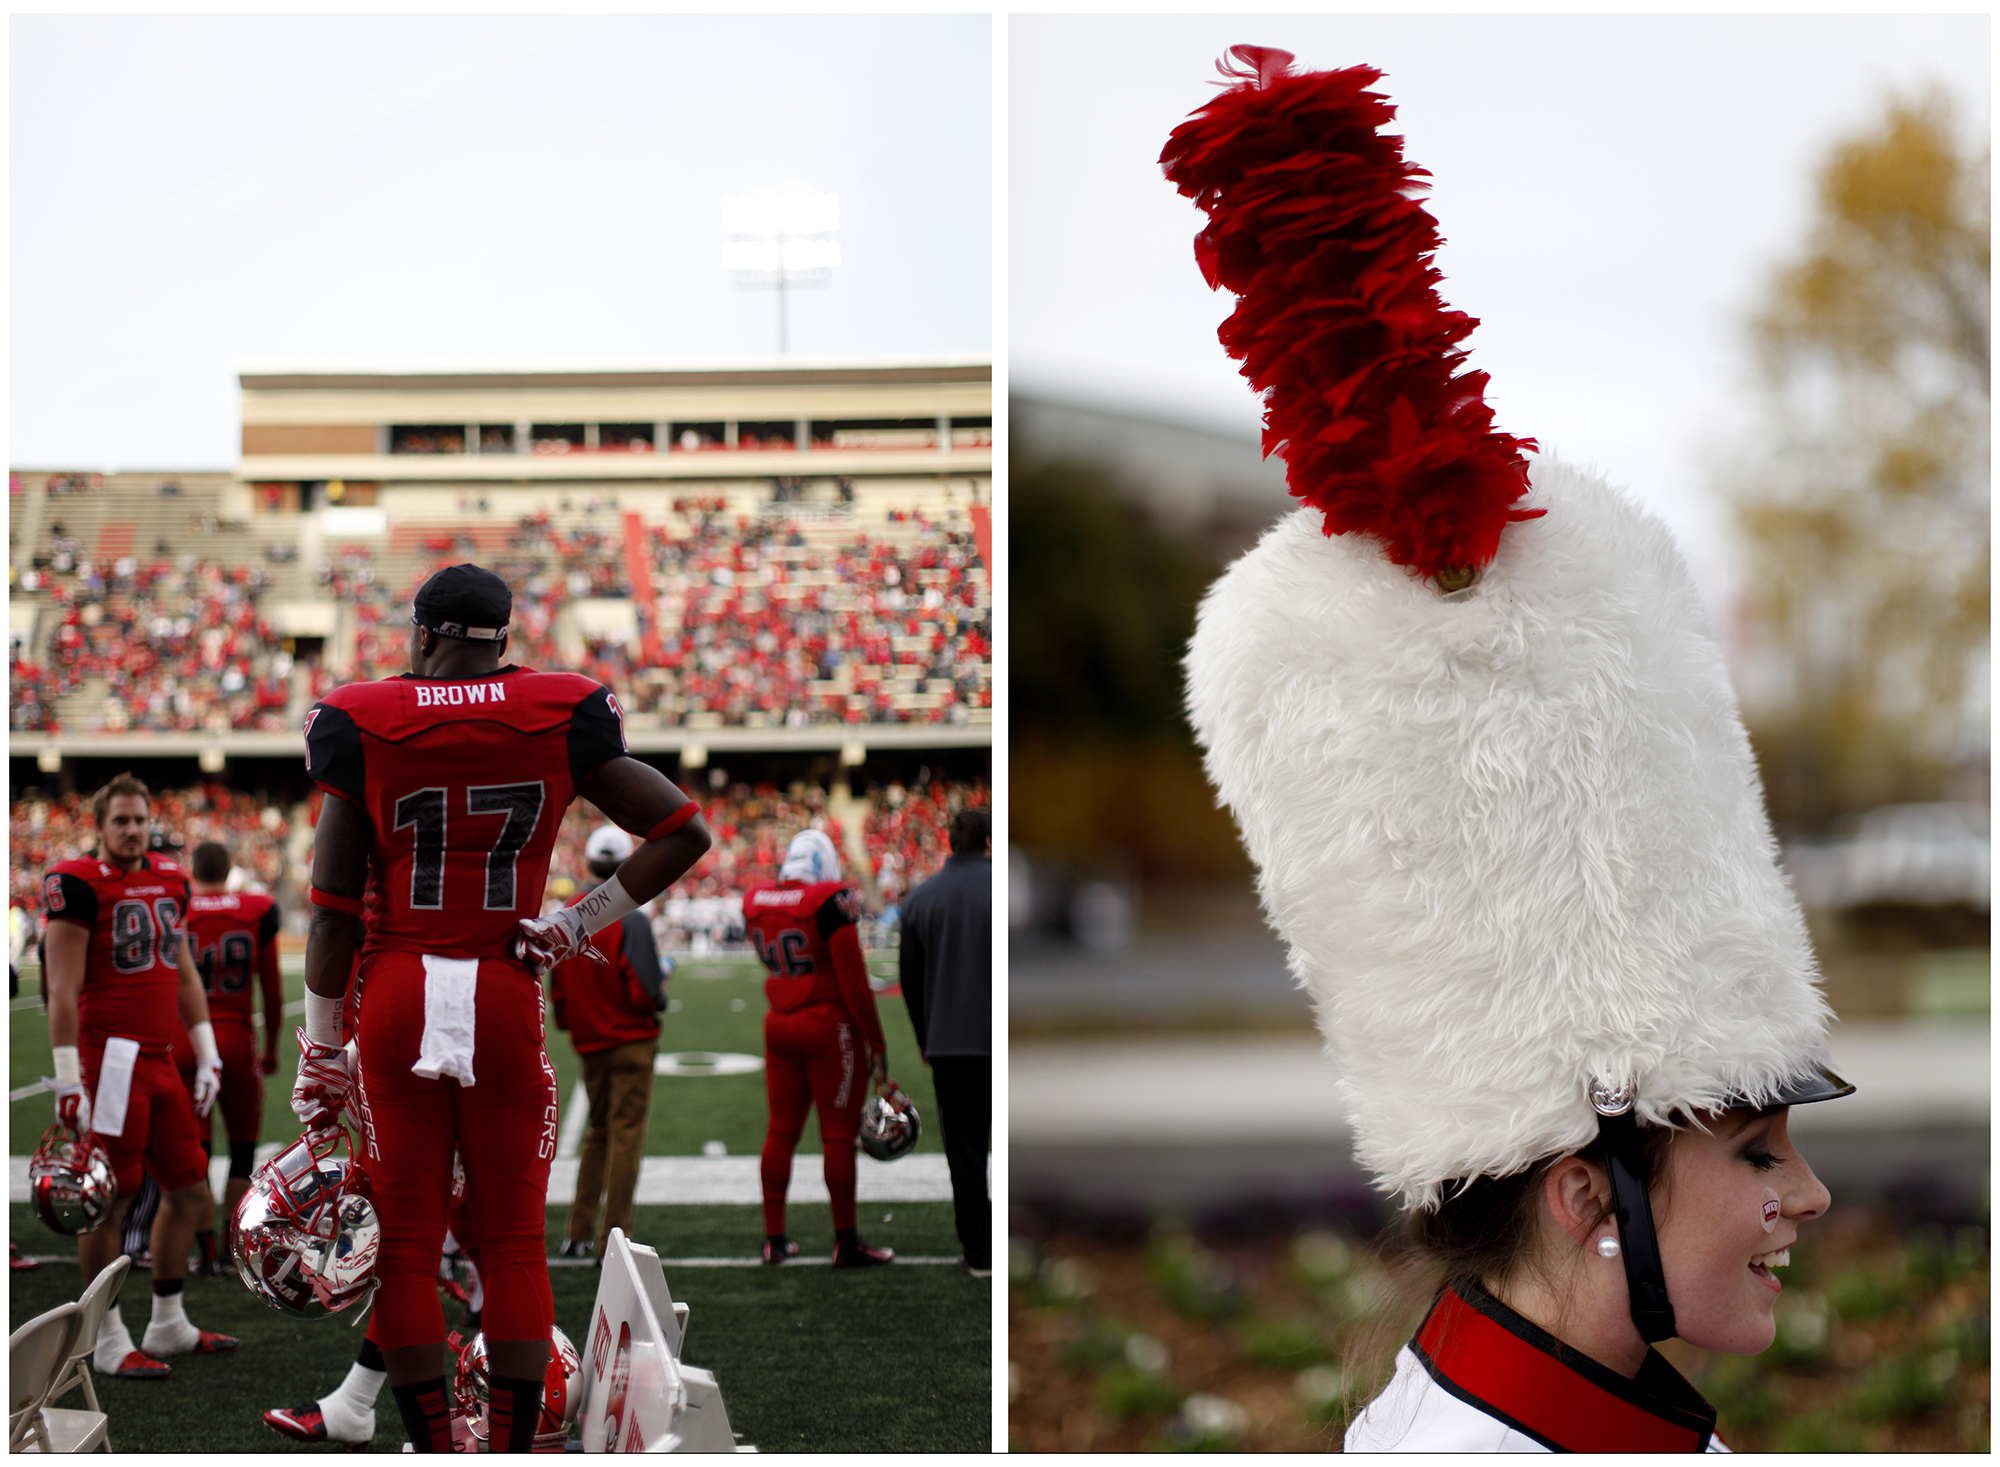  Left: Dejon Brown, a junior and linebacker, watches his team play it's game against UTEP on Saturday, Nov. 8, 2014. &nbsp;WKU won 35-27, their first Homecoming victory in three years. Right: Angela Cook, a senior and drum major, poses for a portrait